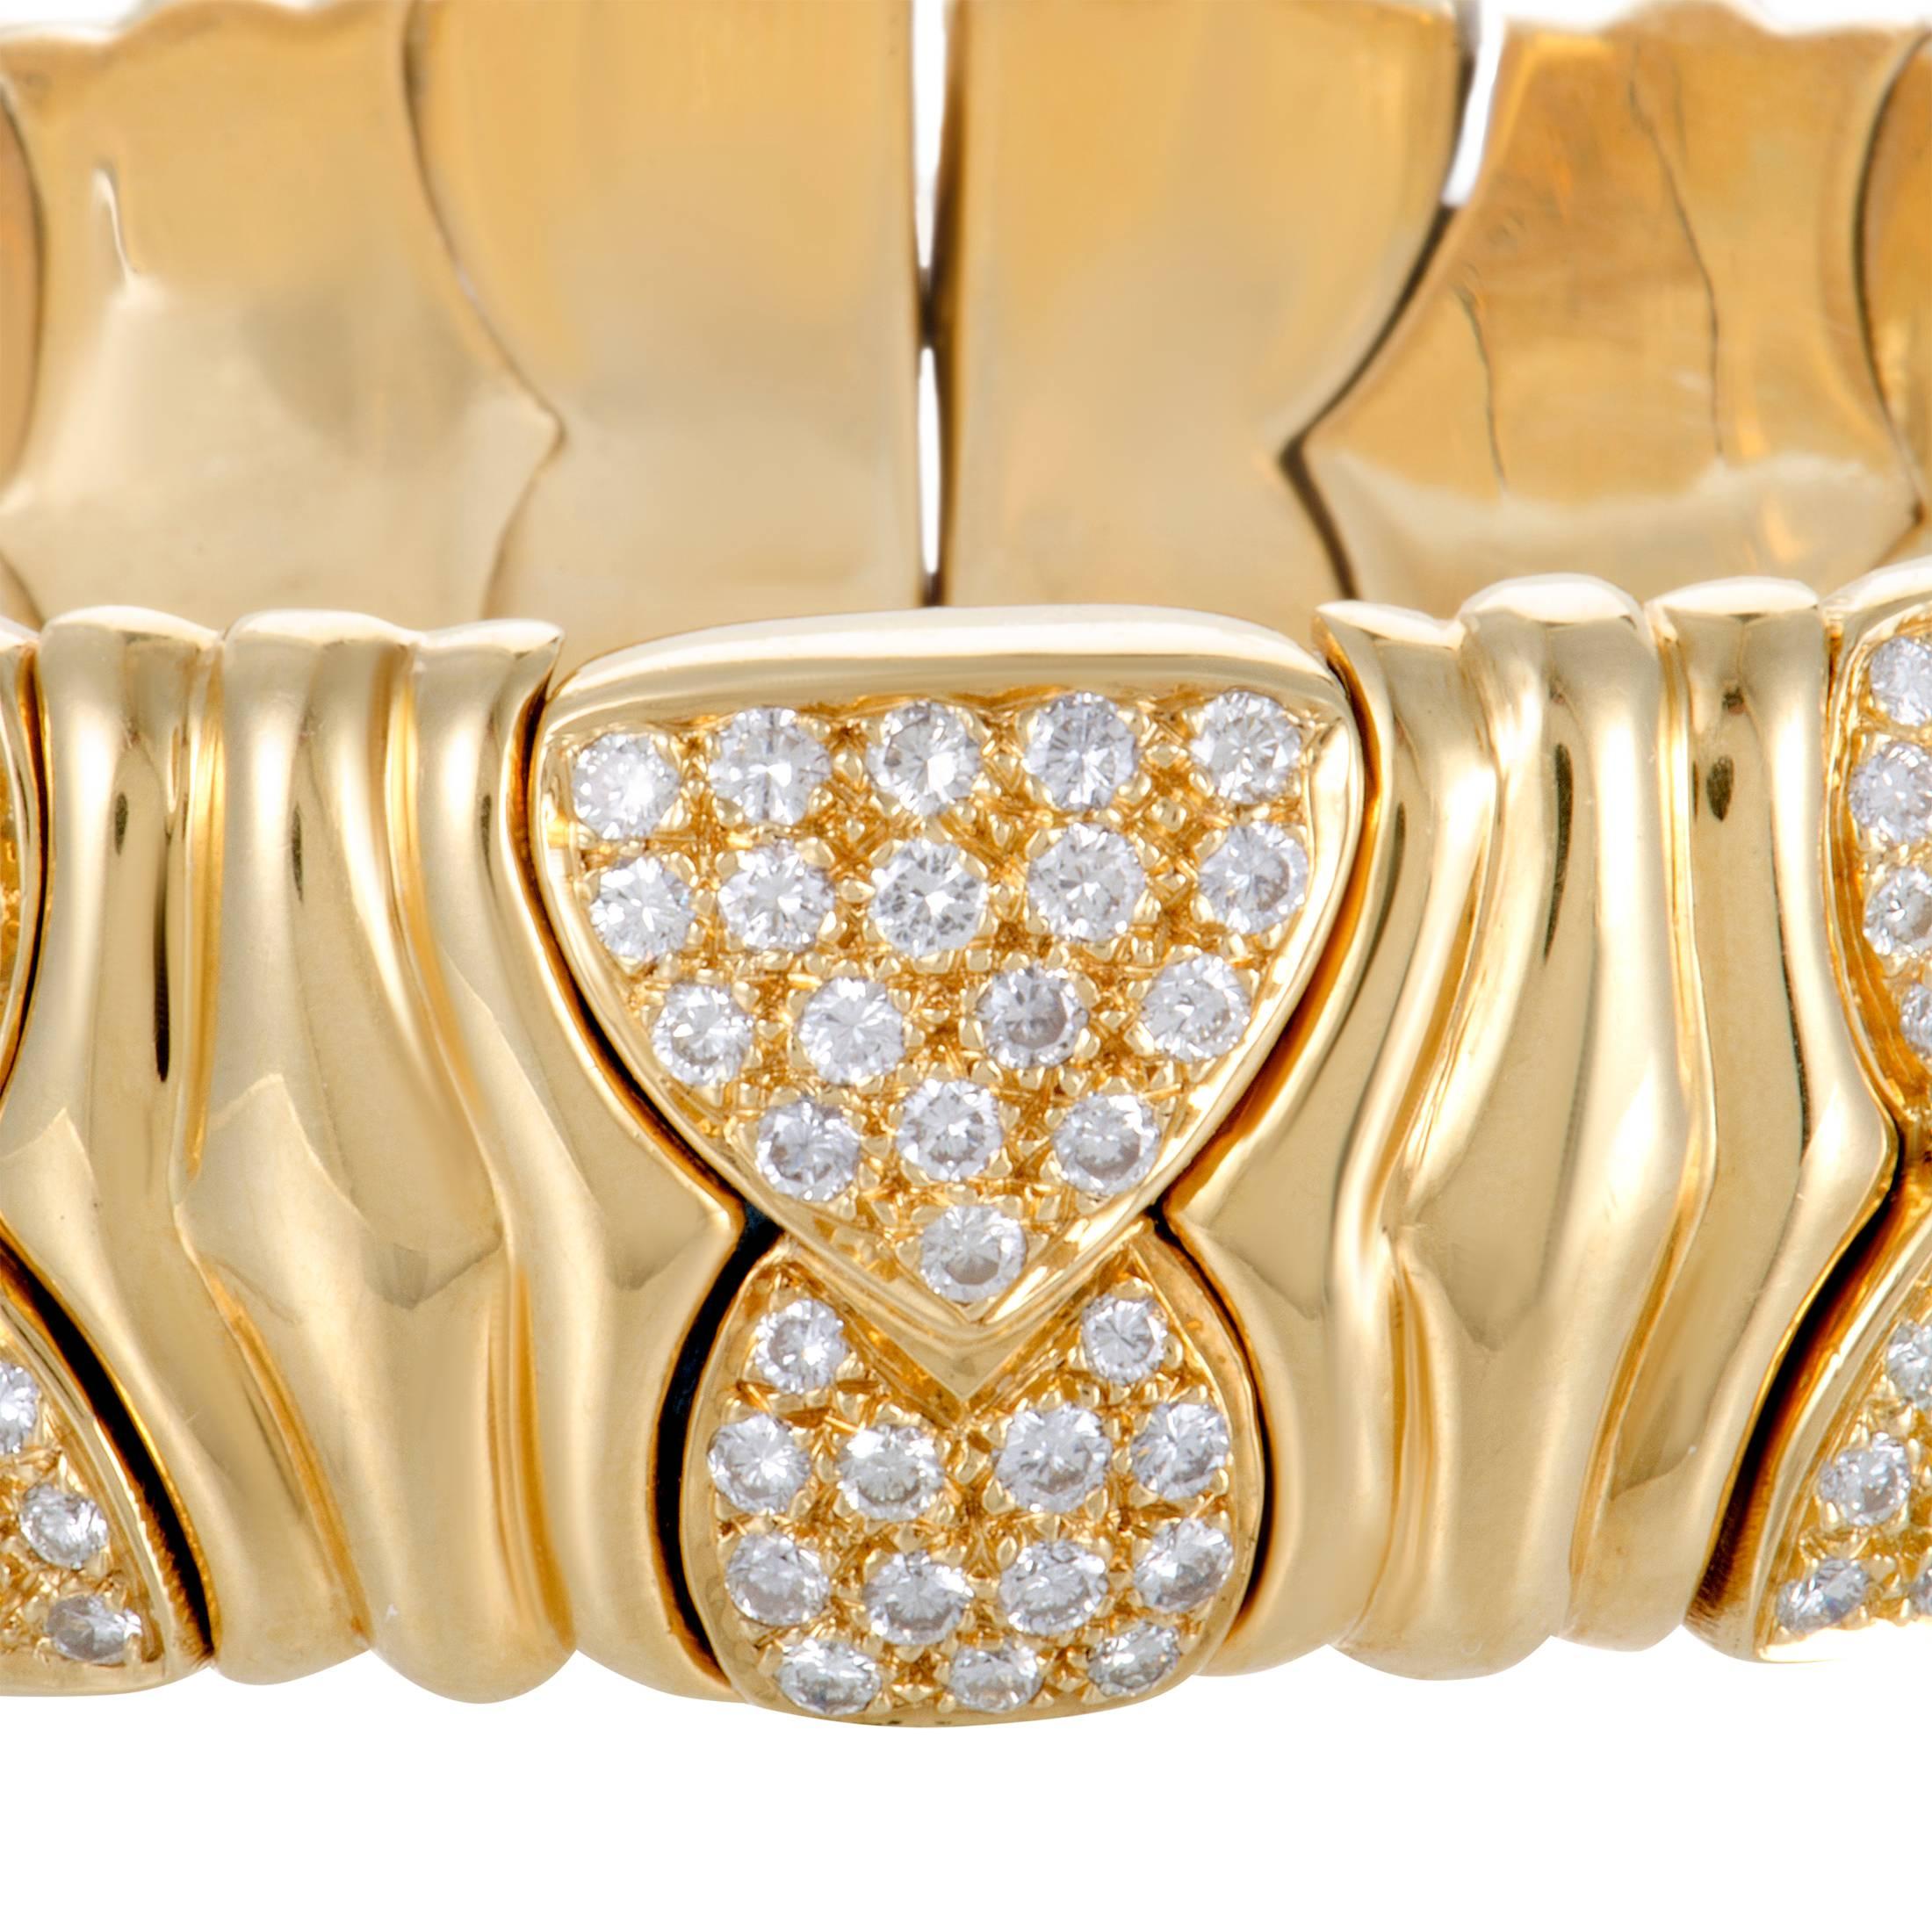 The bold, eye-catching design and the enchanting radiance of 18K yellow gold produce an extravagant sight in this stunning Bulgari bracelet that also boasts scintillating diamond stones totaling approximately 3.10 carats.
Included Items: